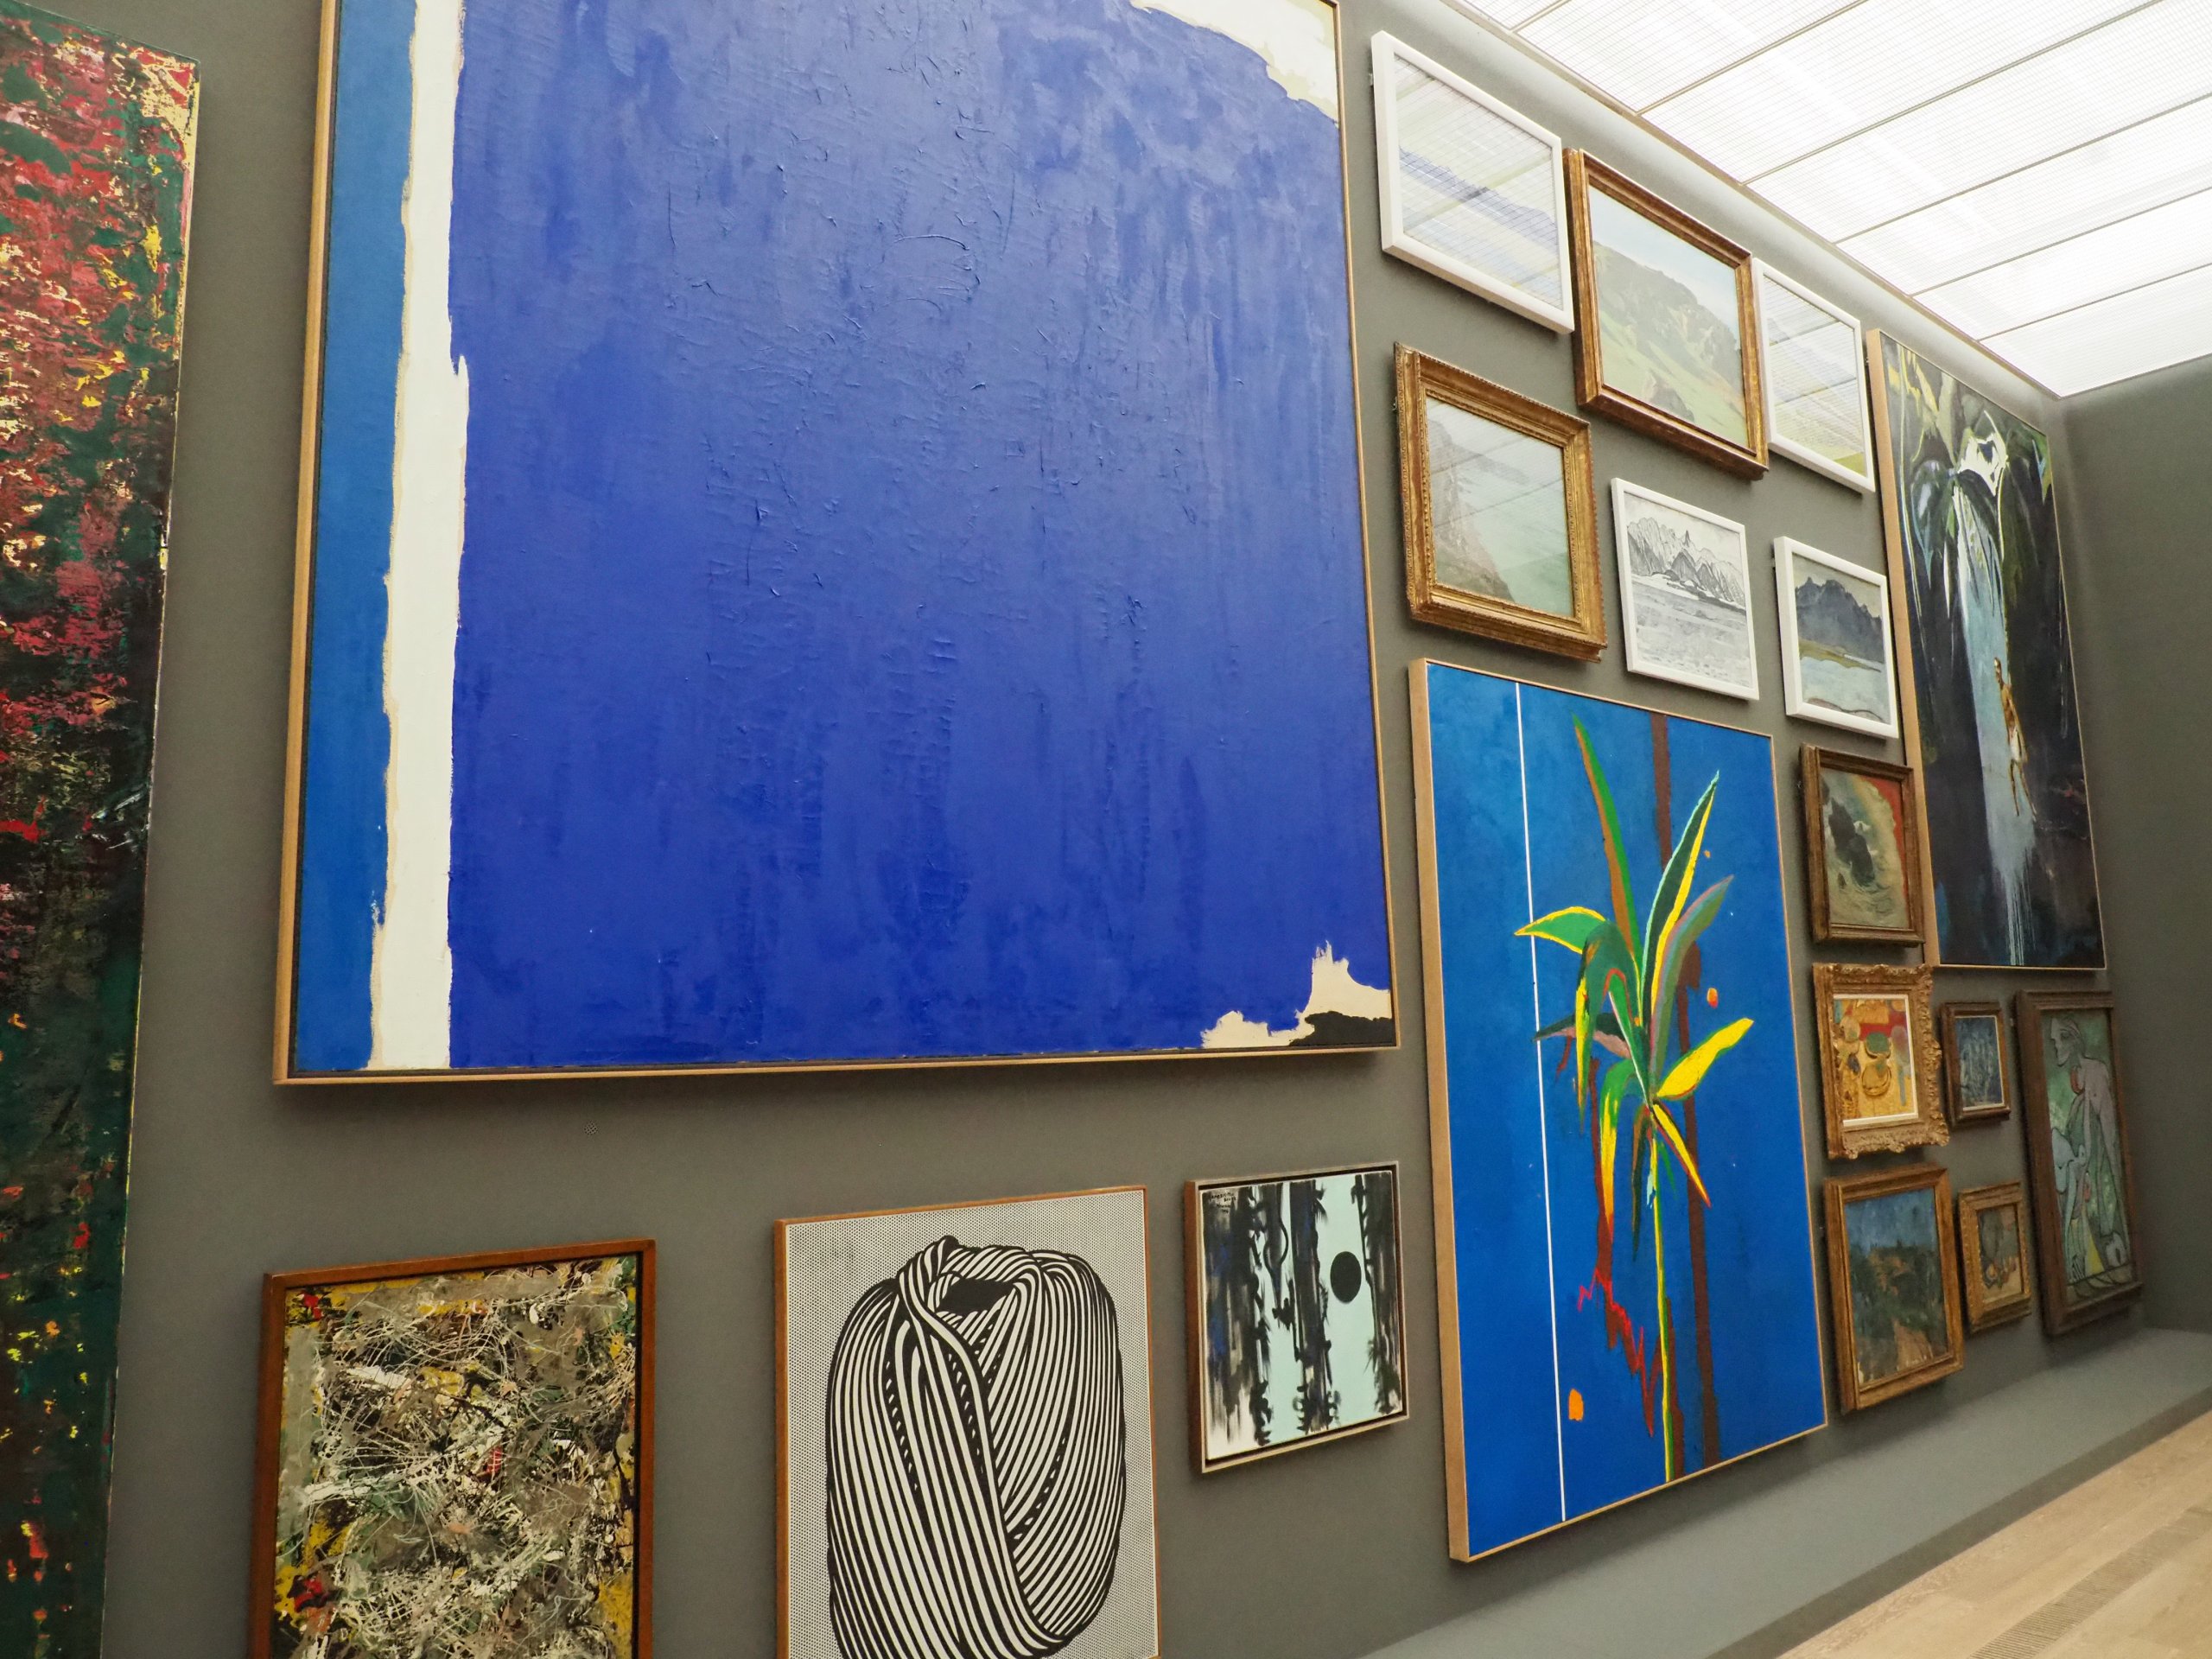 The Beyeler Museum in Basel, Switzerland: A must-see